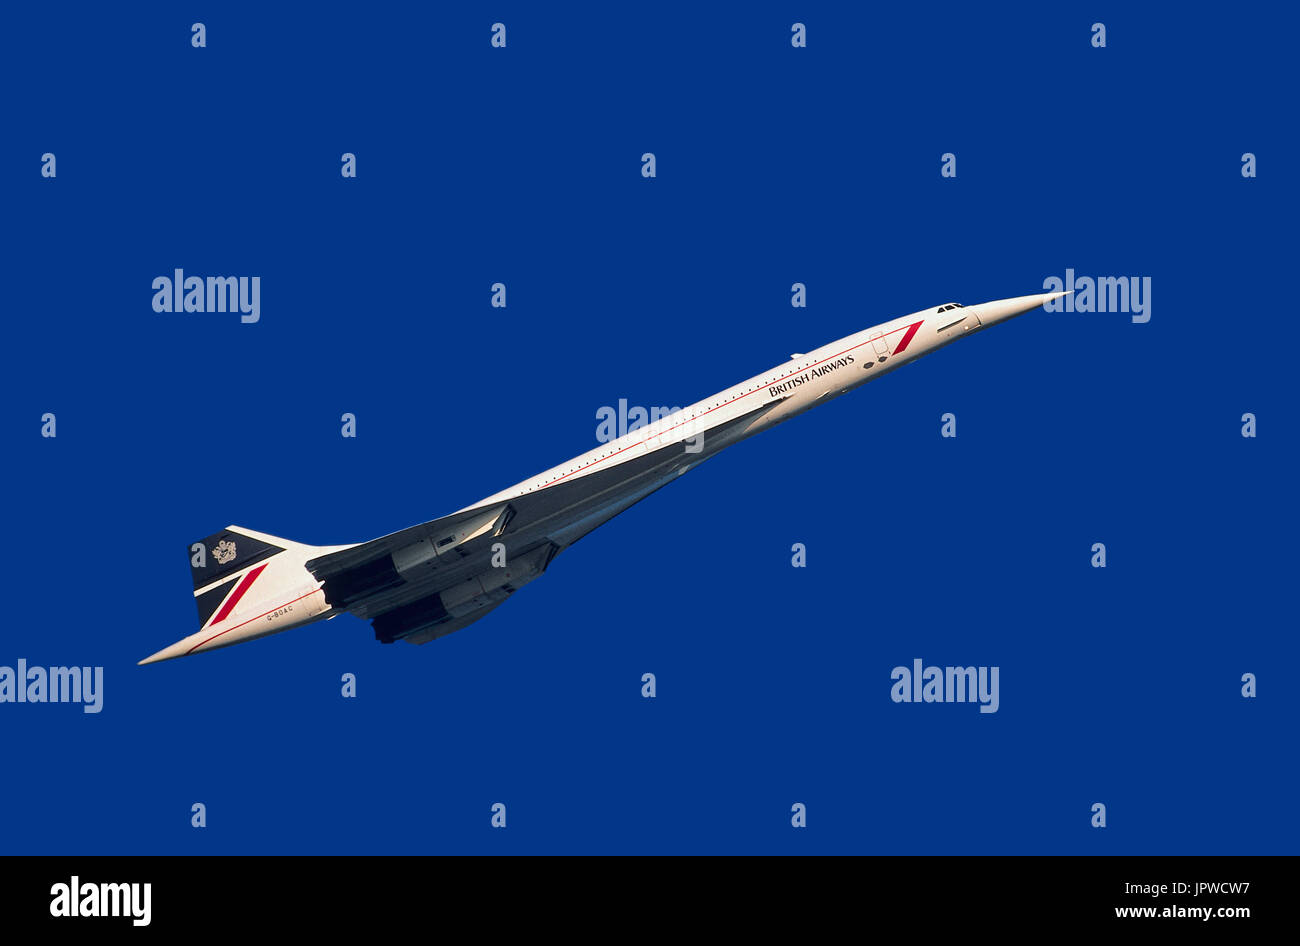 British Airways Aerospatiale BAC Concorde climbing out after take-off Stock Photo